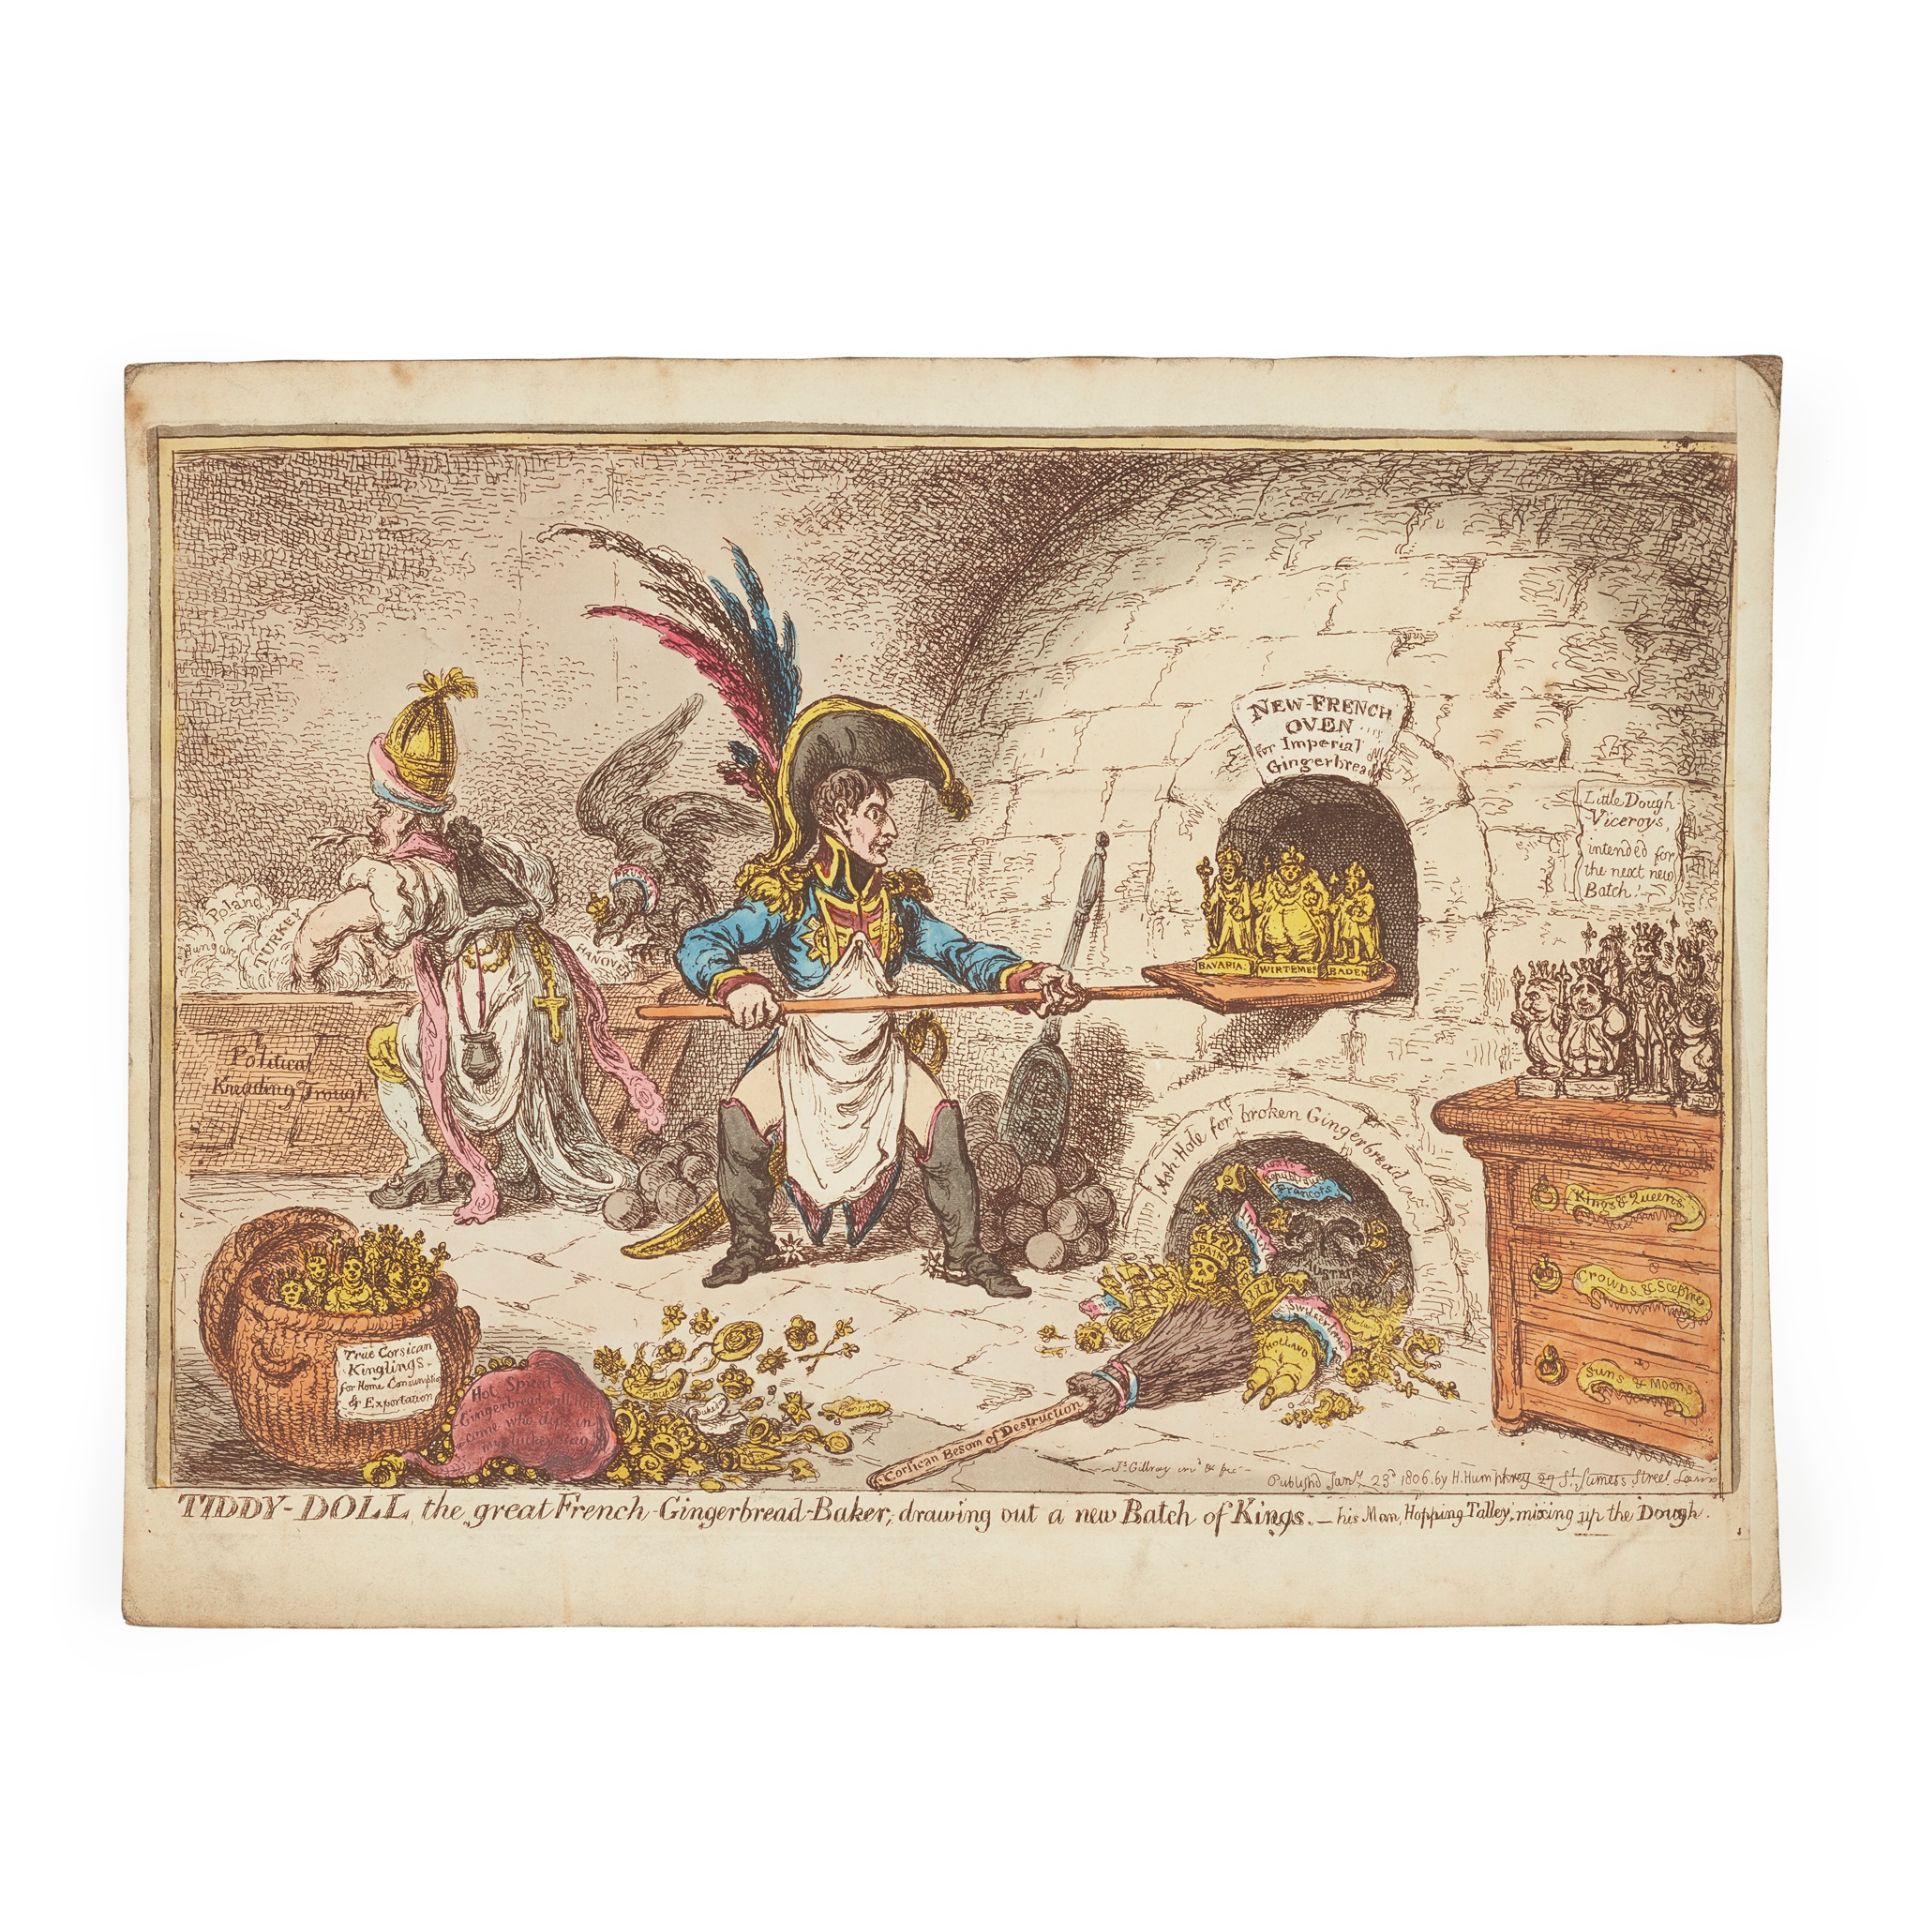 COLLECTION OF SATIRICAL ENGRAVINGS, JAMES GILLRAY AND OTHERS EARLY 19TH CENTURY